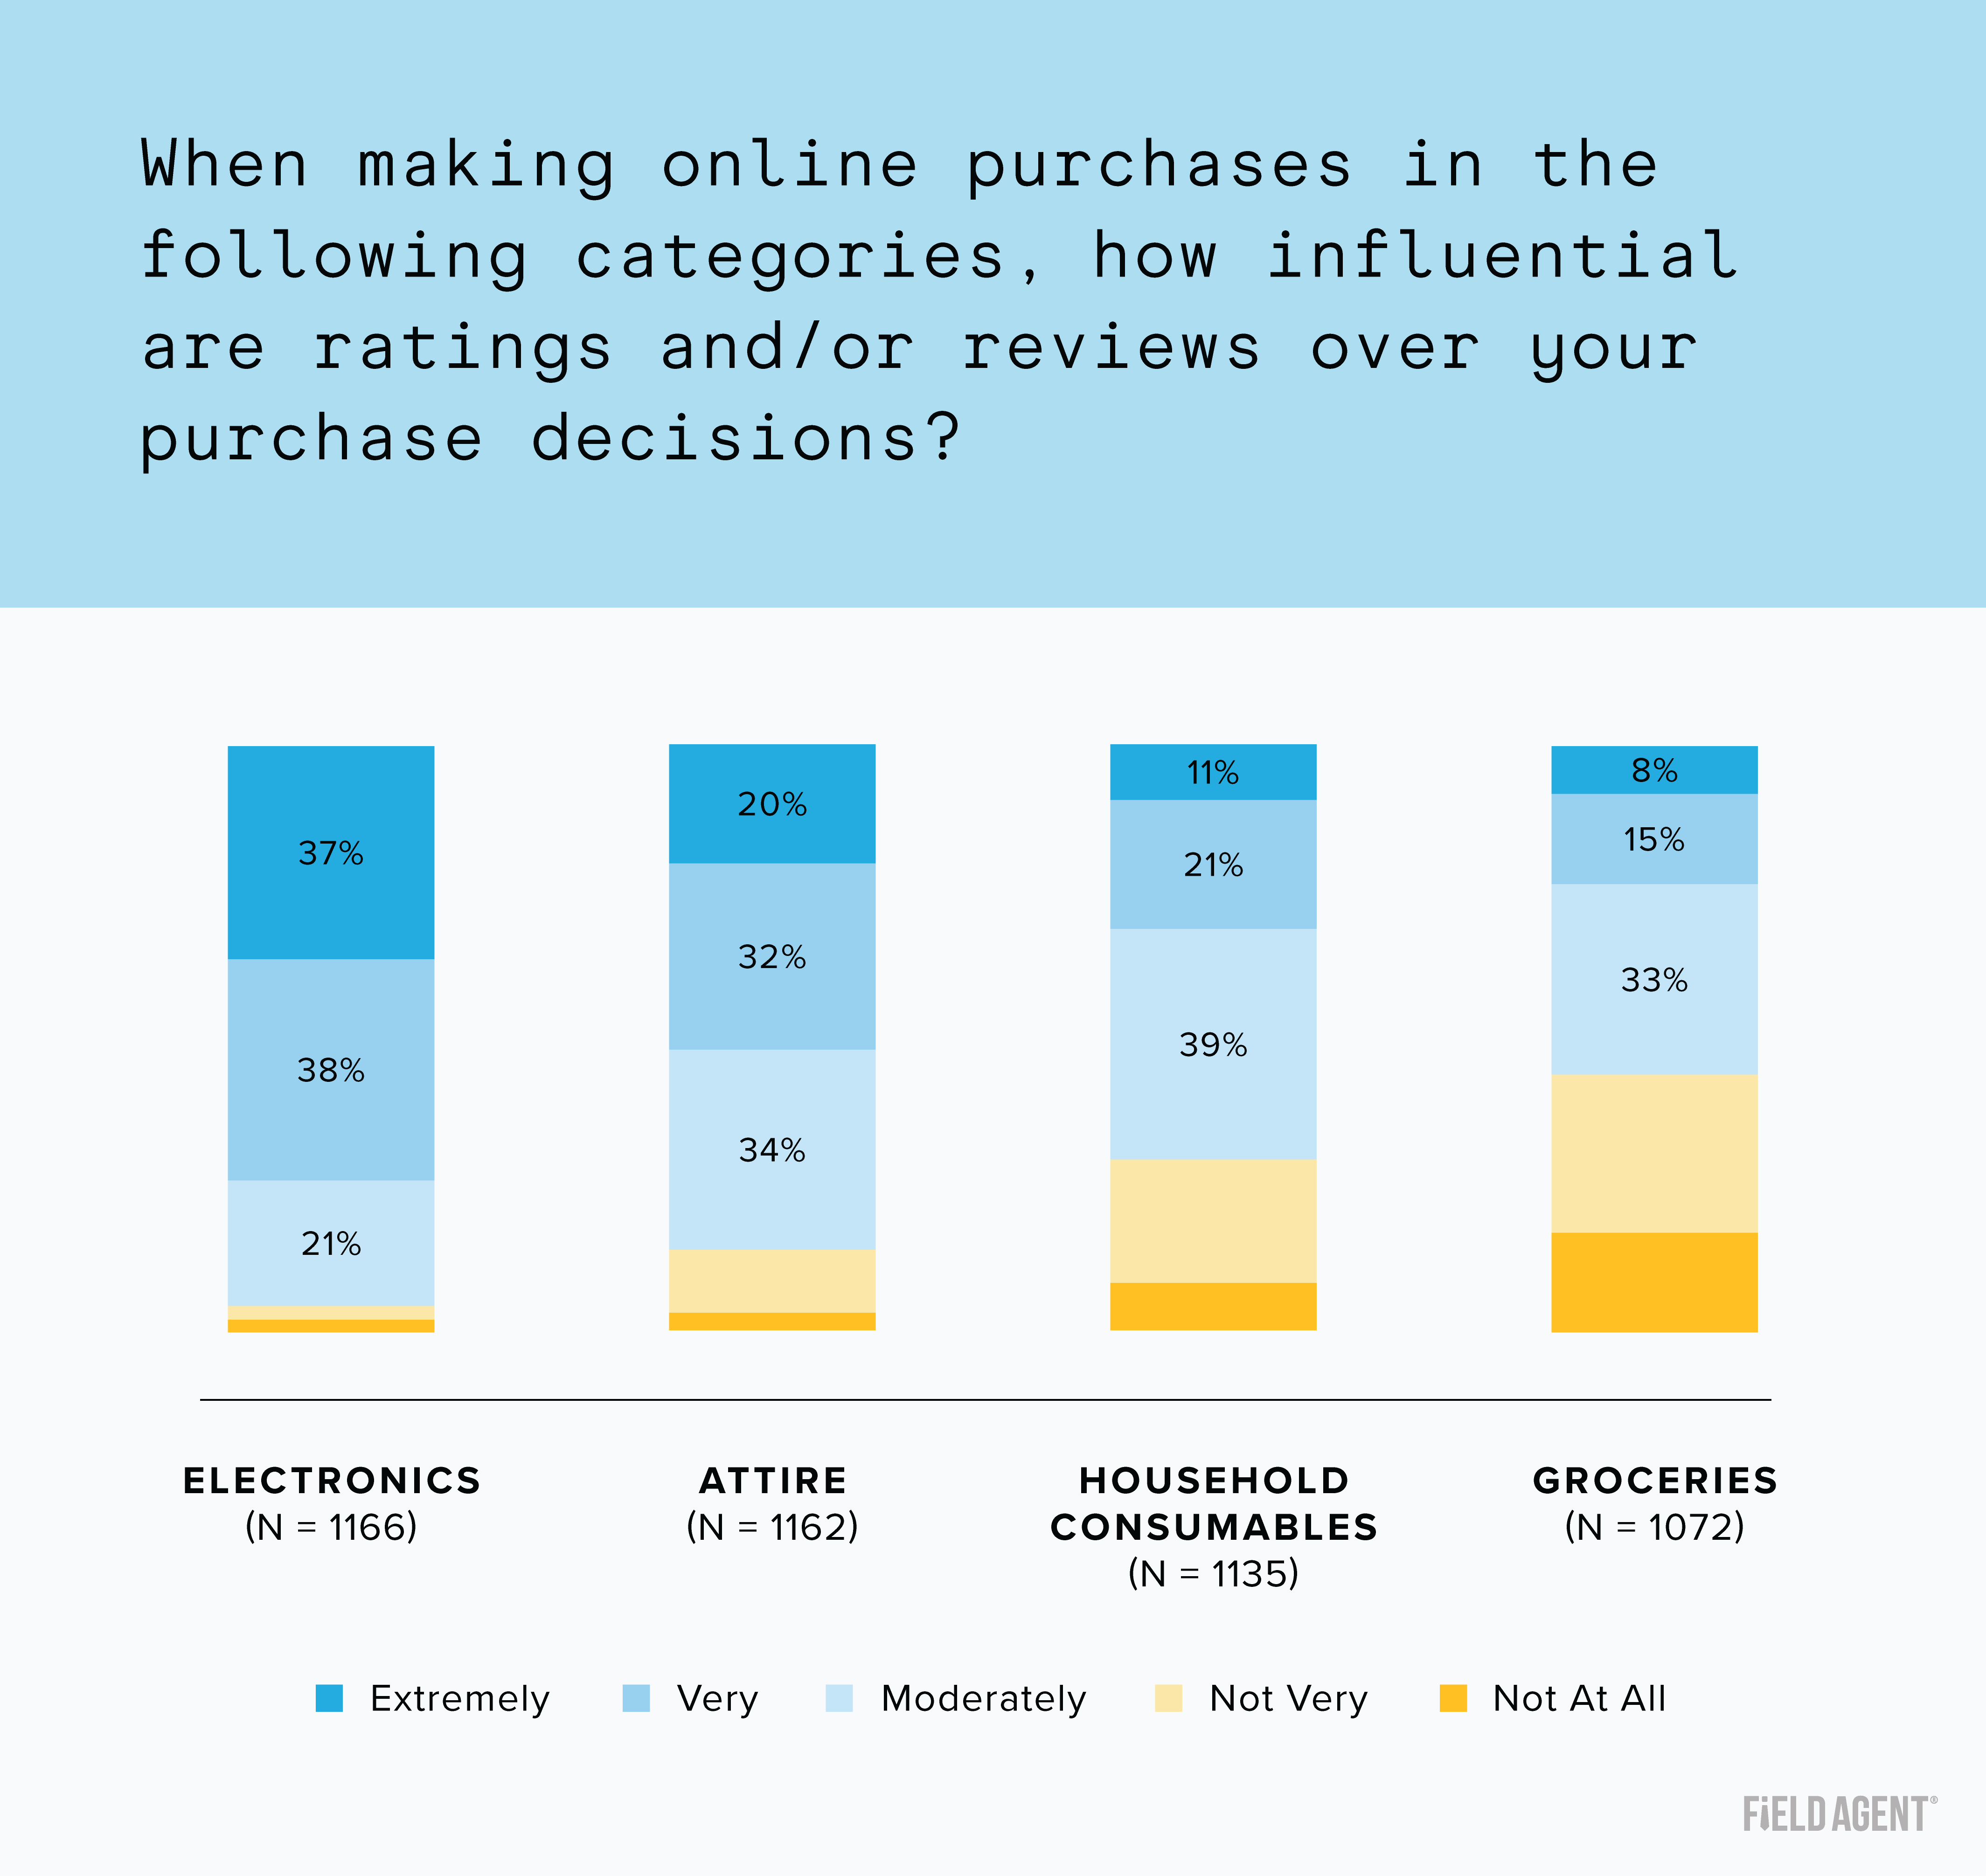 Graph: How influential are ratings and/or reviews over online shoppers' purchase decisions in electronics, attire, groceries, and consumables?